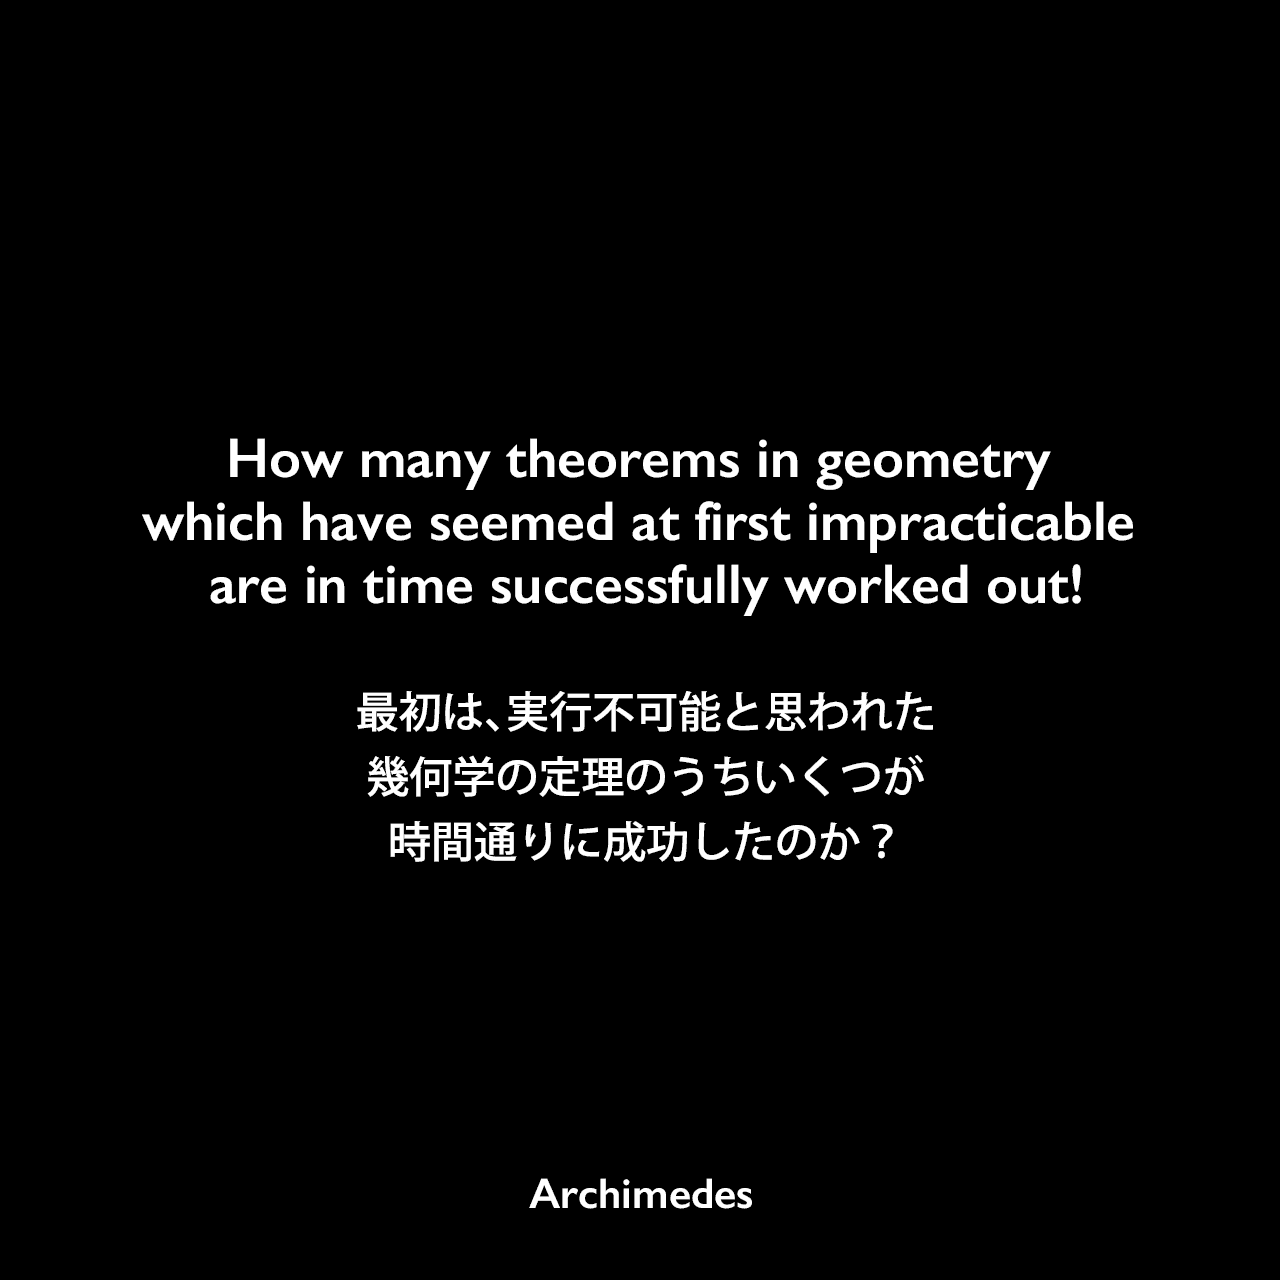 How many theorems in geometry which have seemed at first impracticable are in time successfully worked out!最初は、実行不可能と思われた幾何学の定理のうちいくつが時間通りに成功したのか？- アルキメデスの論文「On Spirals」よりArchimedes